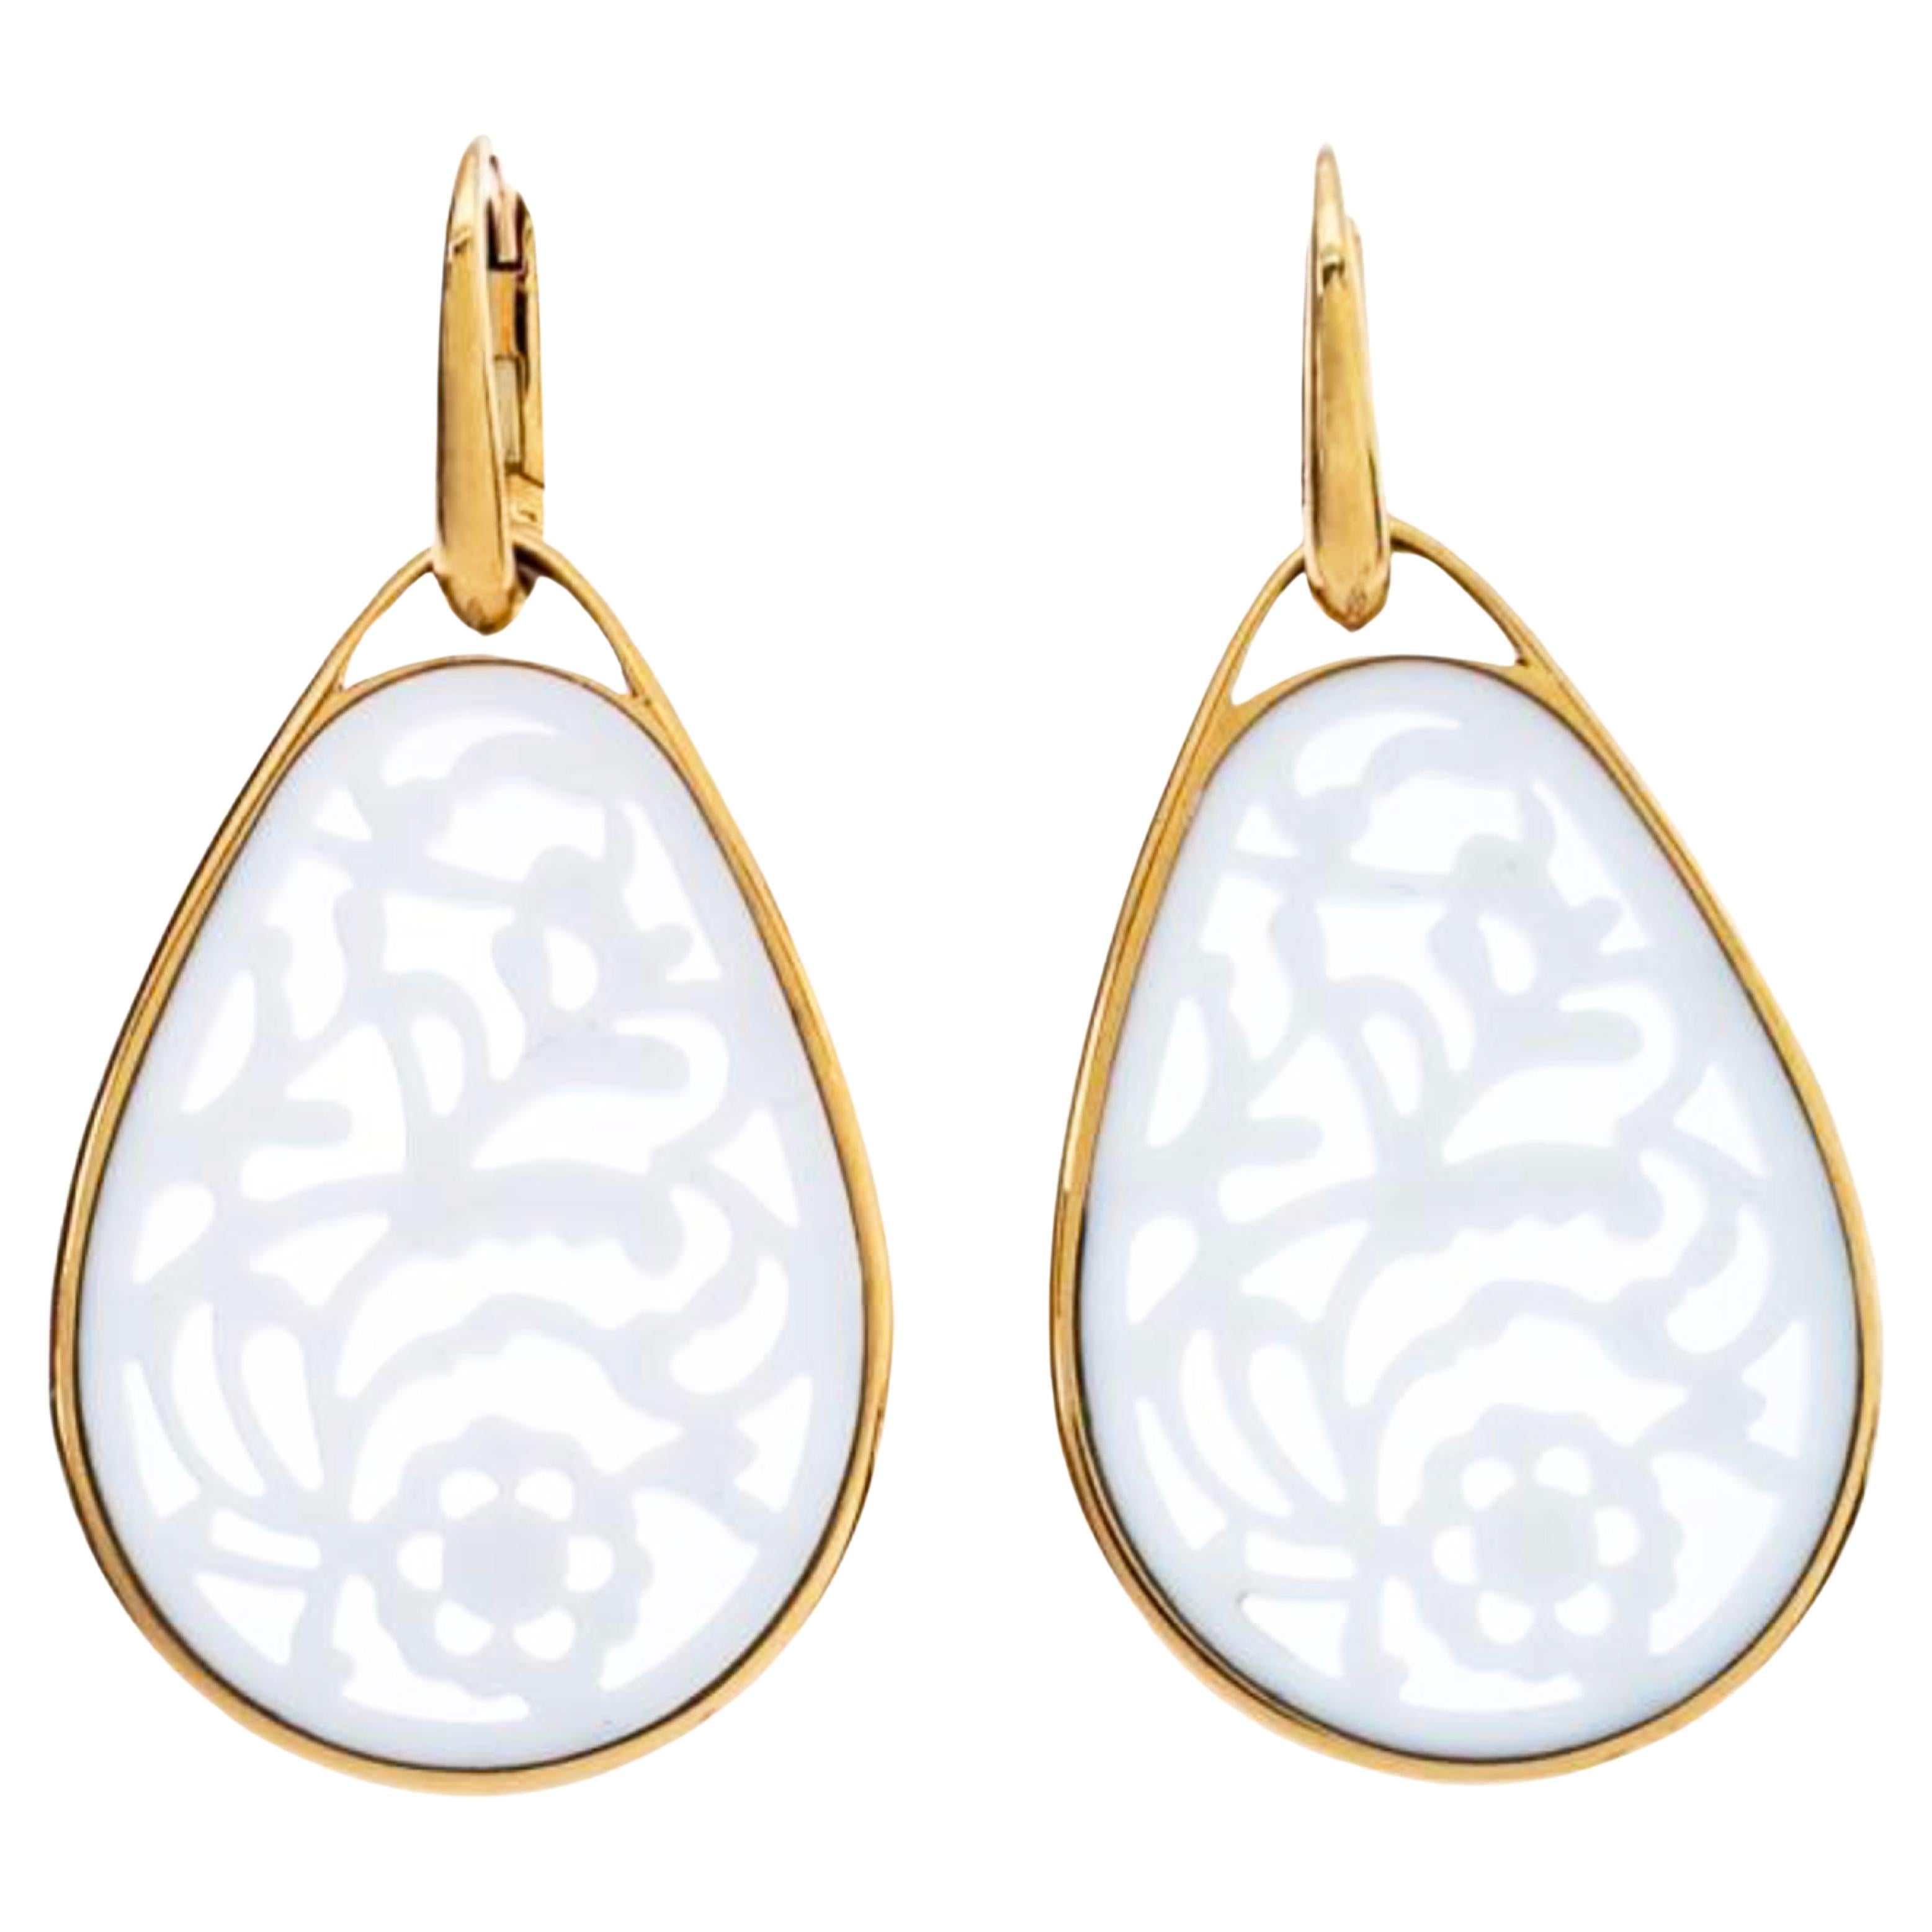 Pomellato 18kt Rose Gold Victoria Collection White Agate Drop Earrings